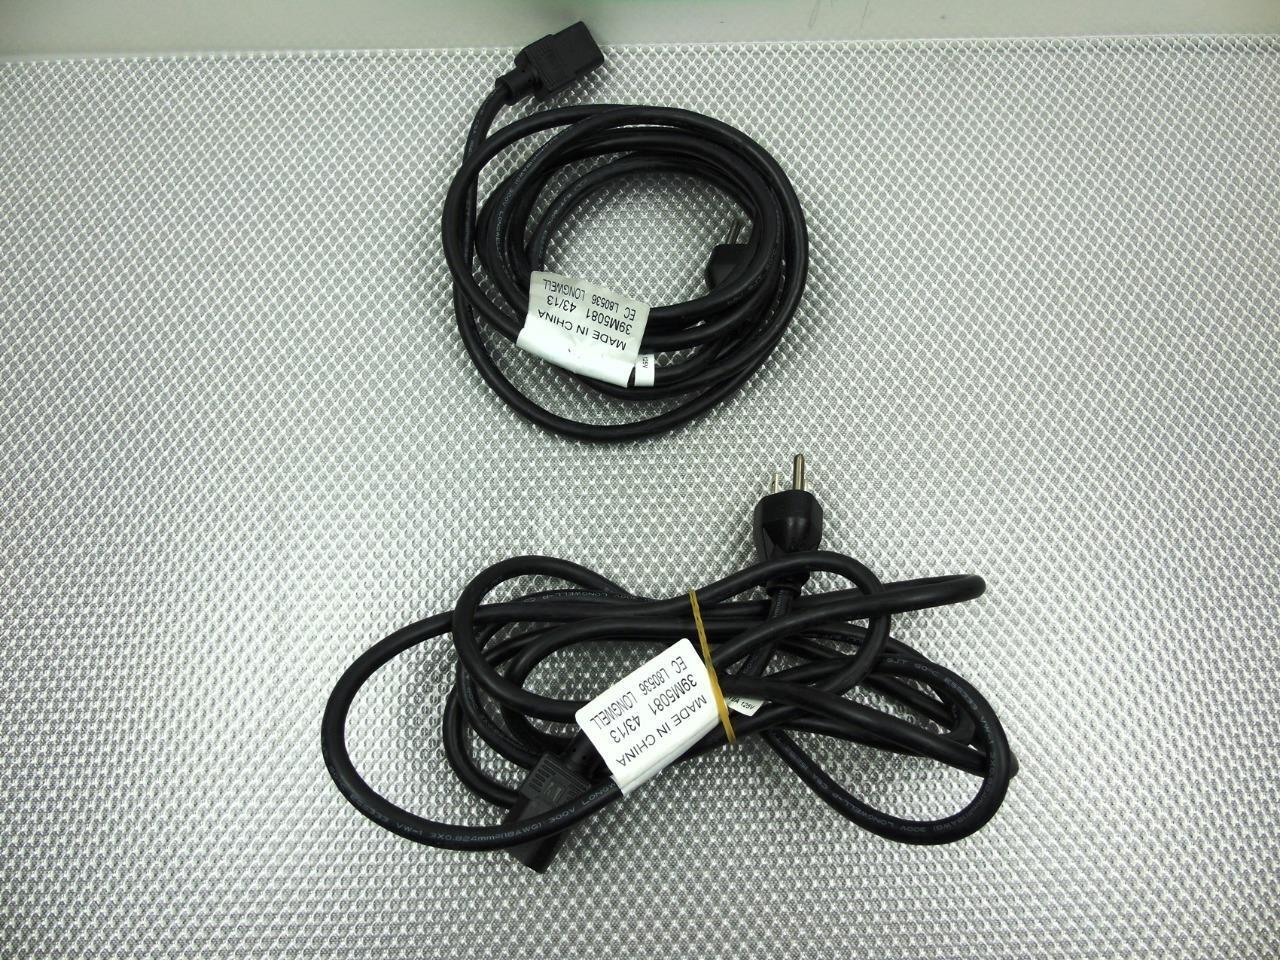 Lot of 2 - IBM 39M5081 9Ft 10A 125V Power Cords Cables